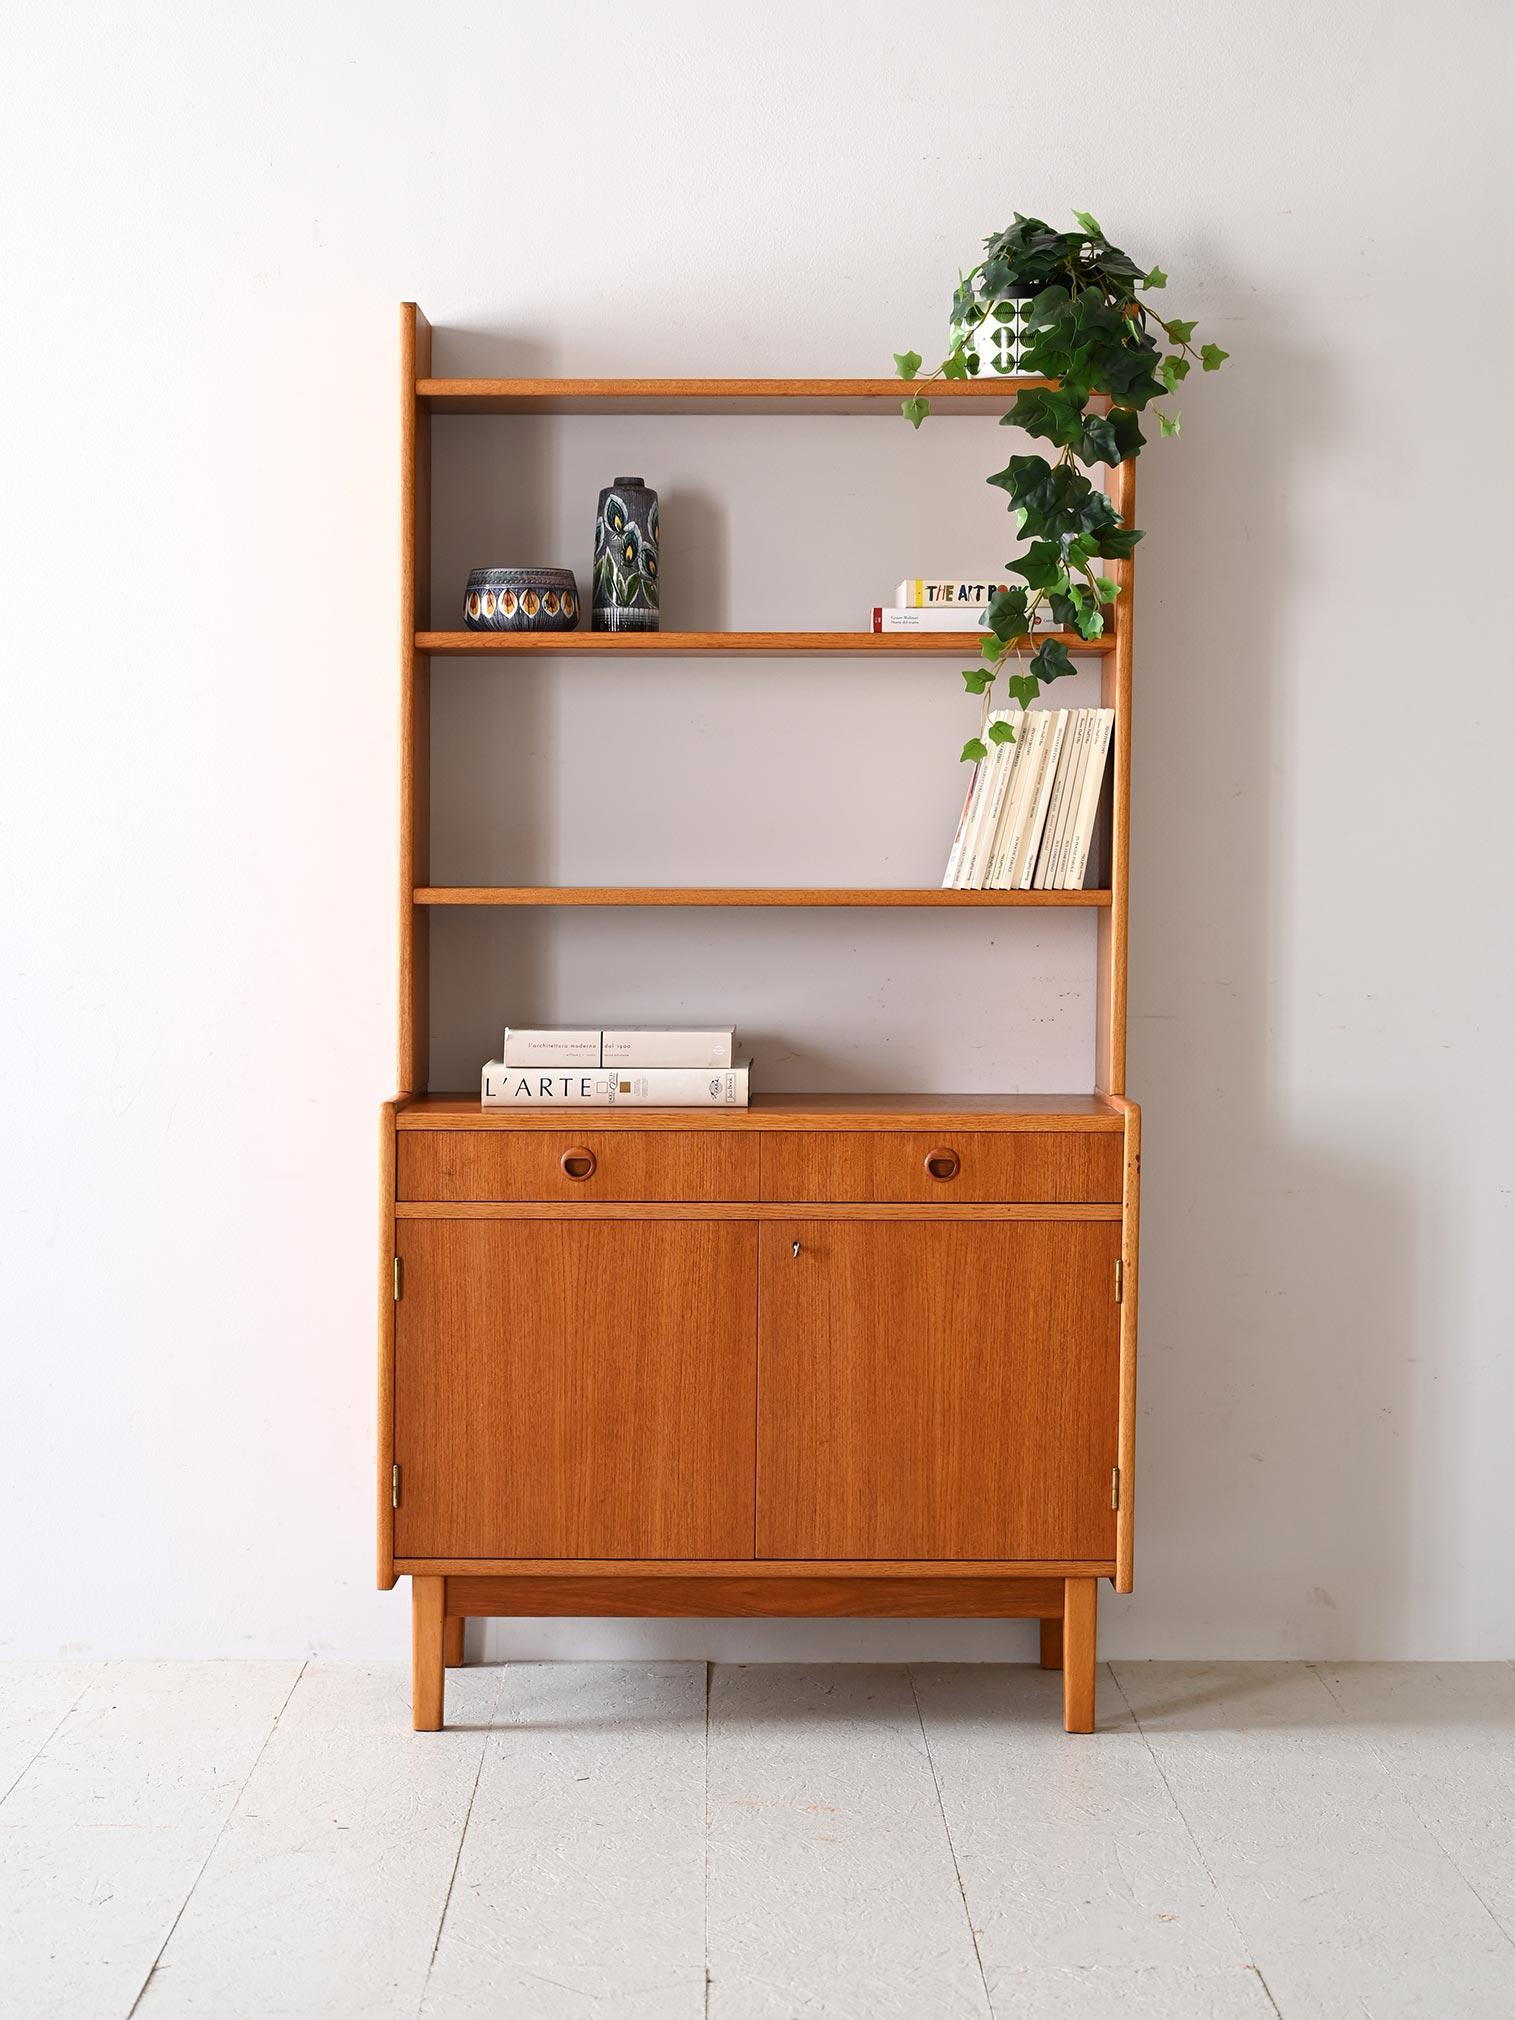 Scandinavian 1960s teak and birch furniture.

This cabinet with built-in bookcase, created in the midst of the Scandinavian style of the 1960s, combines the functionality of an enclosed storage compartment with the aesthetics of an open display